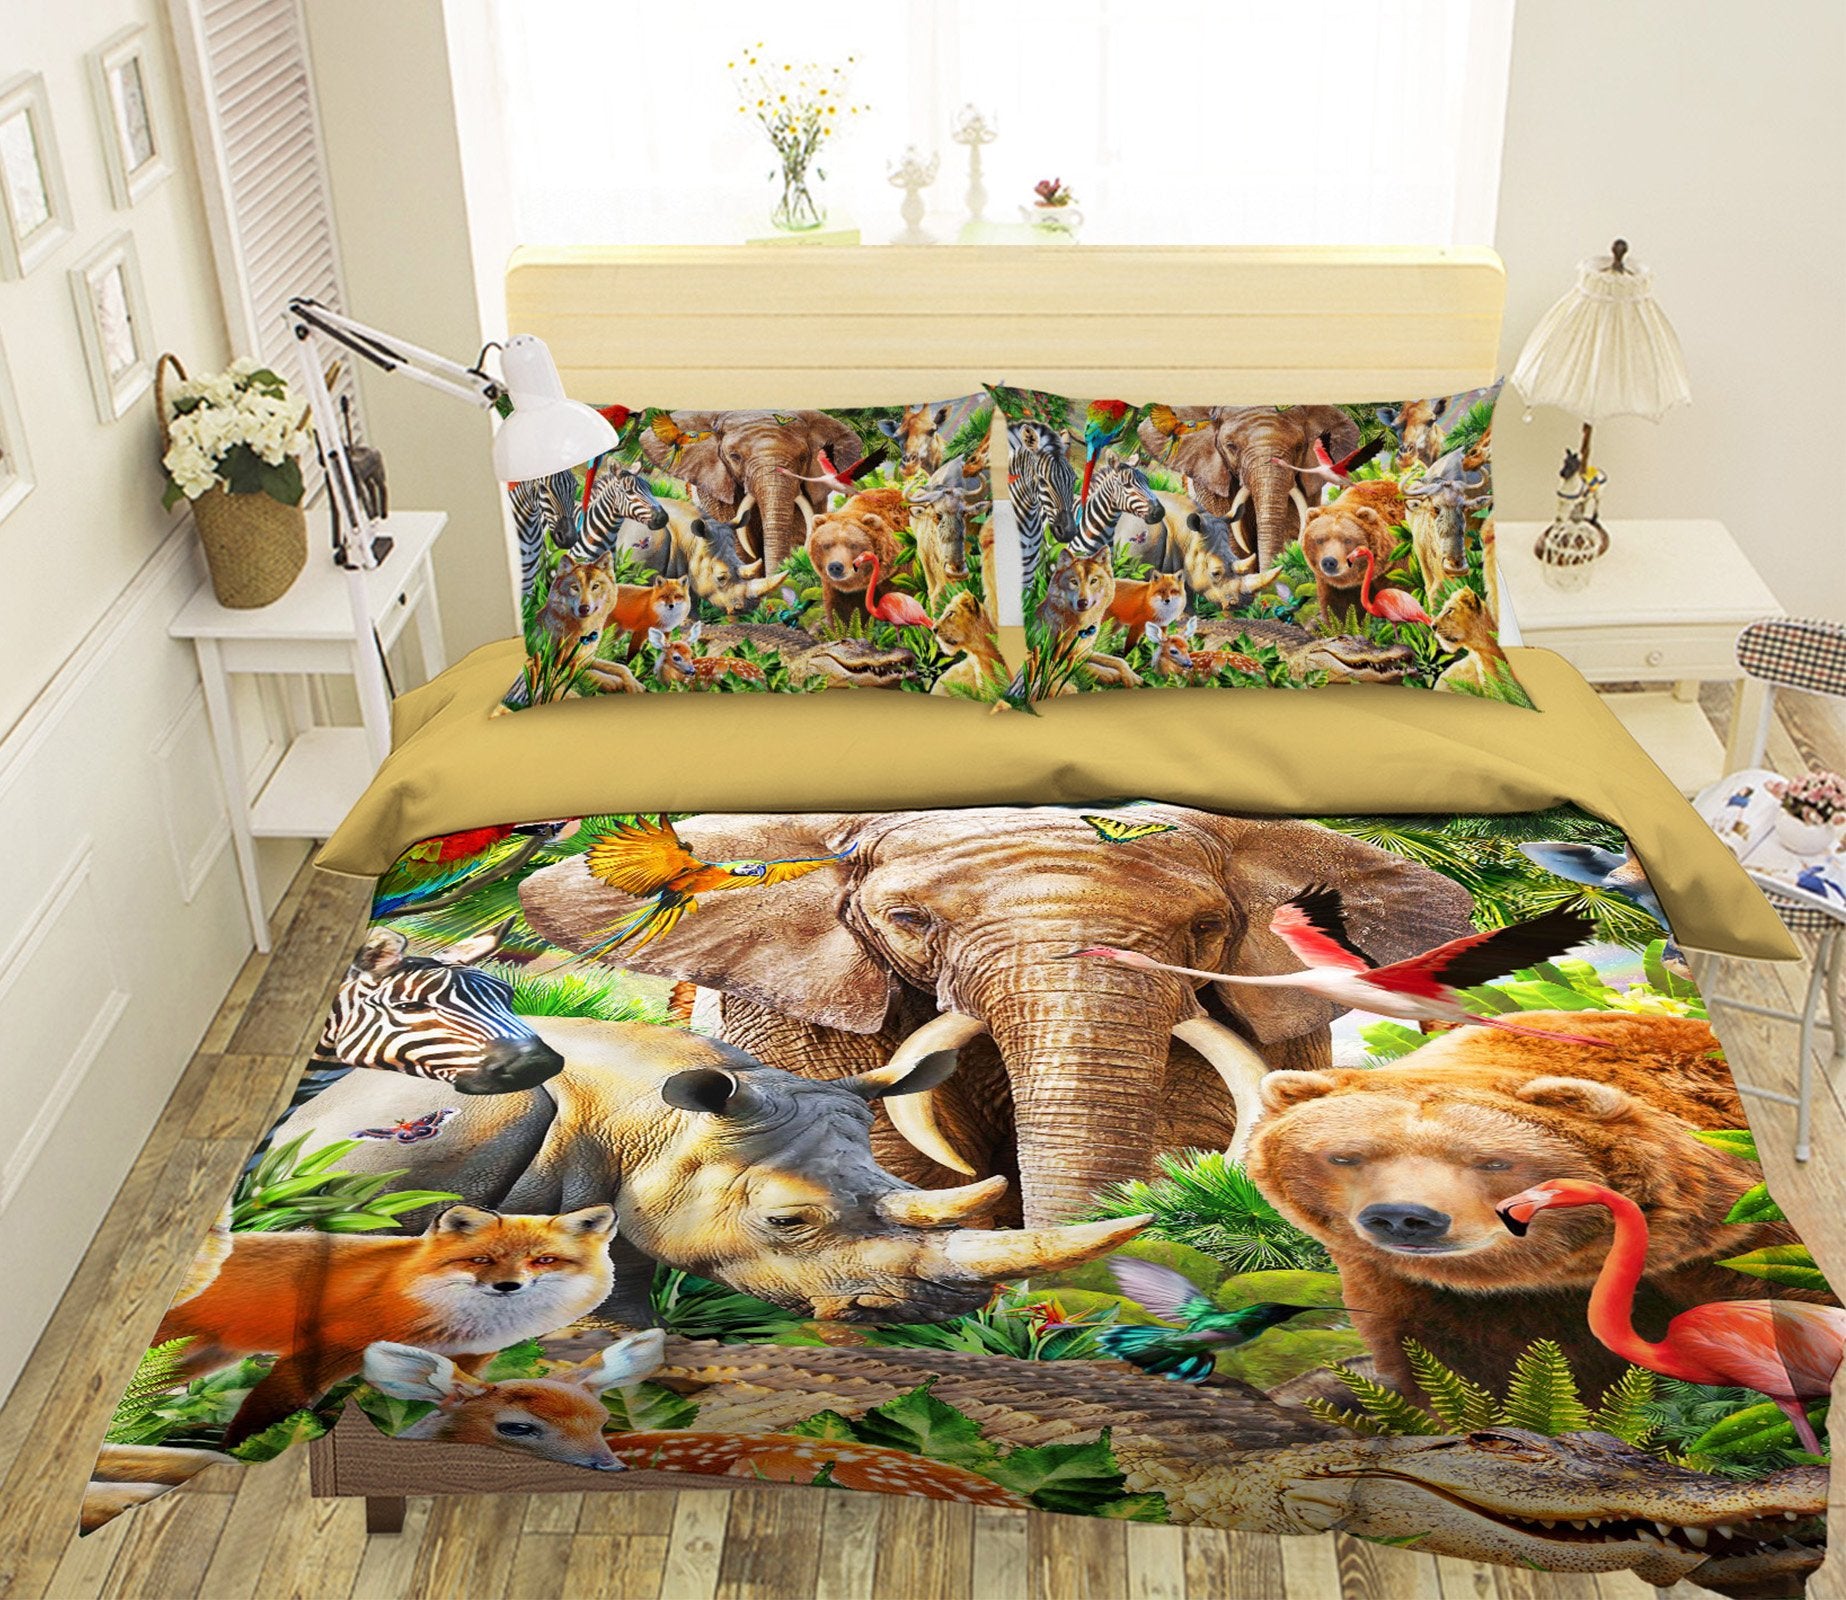 3D Animal World 2129 Adrian Chesterman Bedding Bed Pillowcases Quilt Quiet Covers AJ Creativity Home 